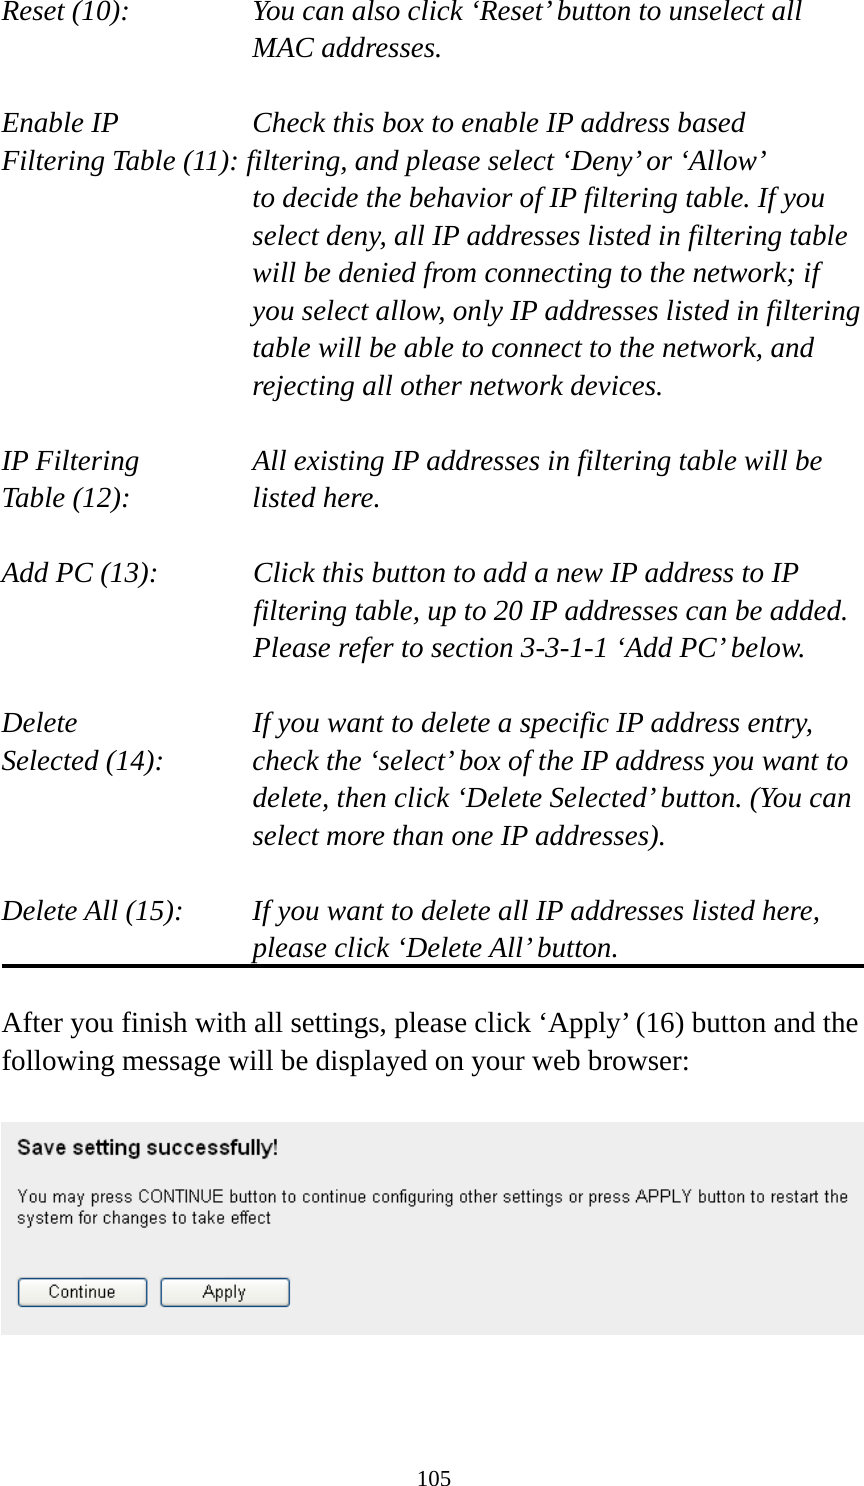 105 Reset (10):    You can also click ‘Reset’ button to unselect all MAC addresses.  Enable IP        Check this box to enable IP address based Filtering Table (11): filtering, and please select ‘Deny’ or ‘Allow’   to decide the behavior of IP filtering table. If you select deny, all IP addresses listed in filtering table will be denied from connecting to the network; if you select allow, only IP addresses listed in filtering table will be able to connect to the network, and rejecting all other network devices.  IP Filtering      All existing IP addresses in filtering table will be Table (12):       listed here.  Add PC (13):    Click this button to add a new IP address to IP filtering table, up to 20 IP addresses can be added.   Please refer to section 3-3-1-1 ‘Add PC’ below.    Delete         If you want to delete a specific IP address entry, Selected (14):    check the ‘select’ box of the IP address you want to delete, then click ‘Delete Selected’ button. (You can select more than one IP addresses).  Delete All (15):    If you want to delete all IP addresses listed here, please click ‘Delete All’ button.  After you finish with all settings, please click ‘Apply’ (16) button and the following message will be displayed on your web browser:     